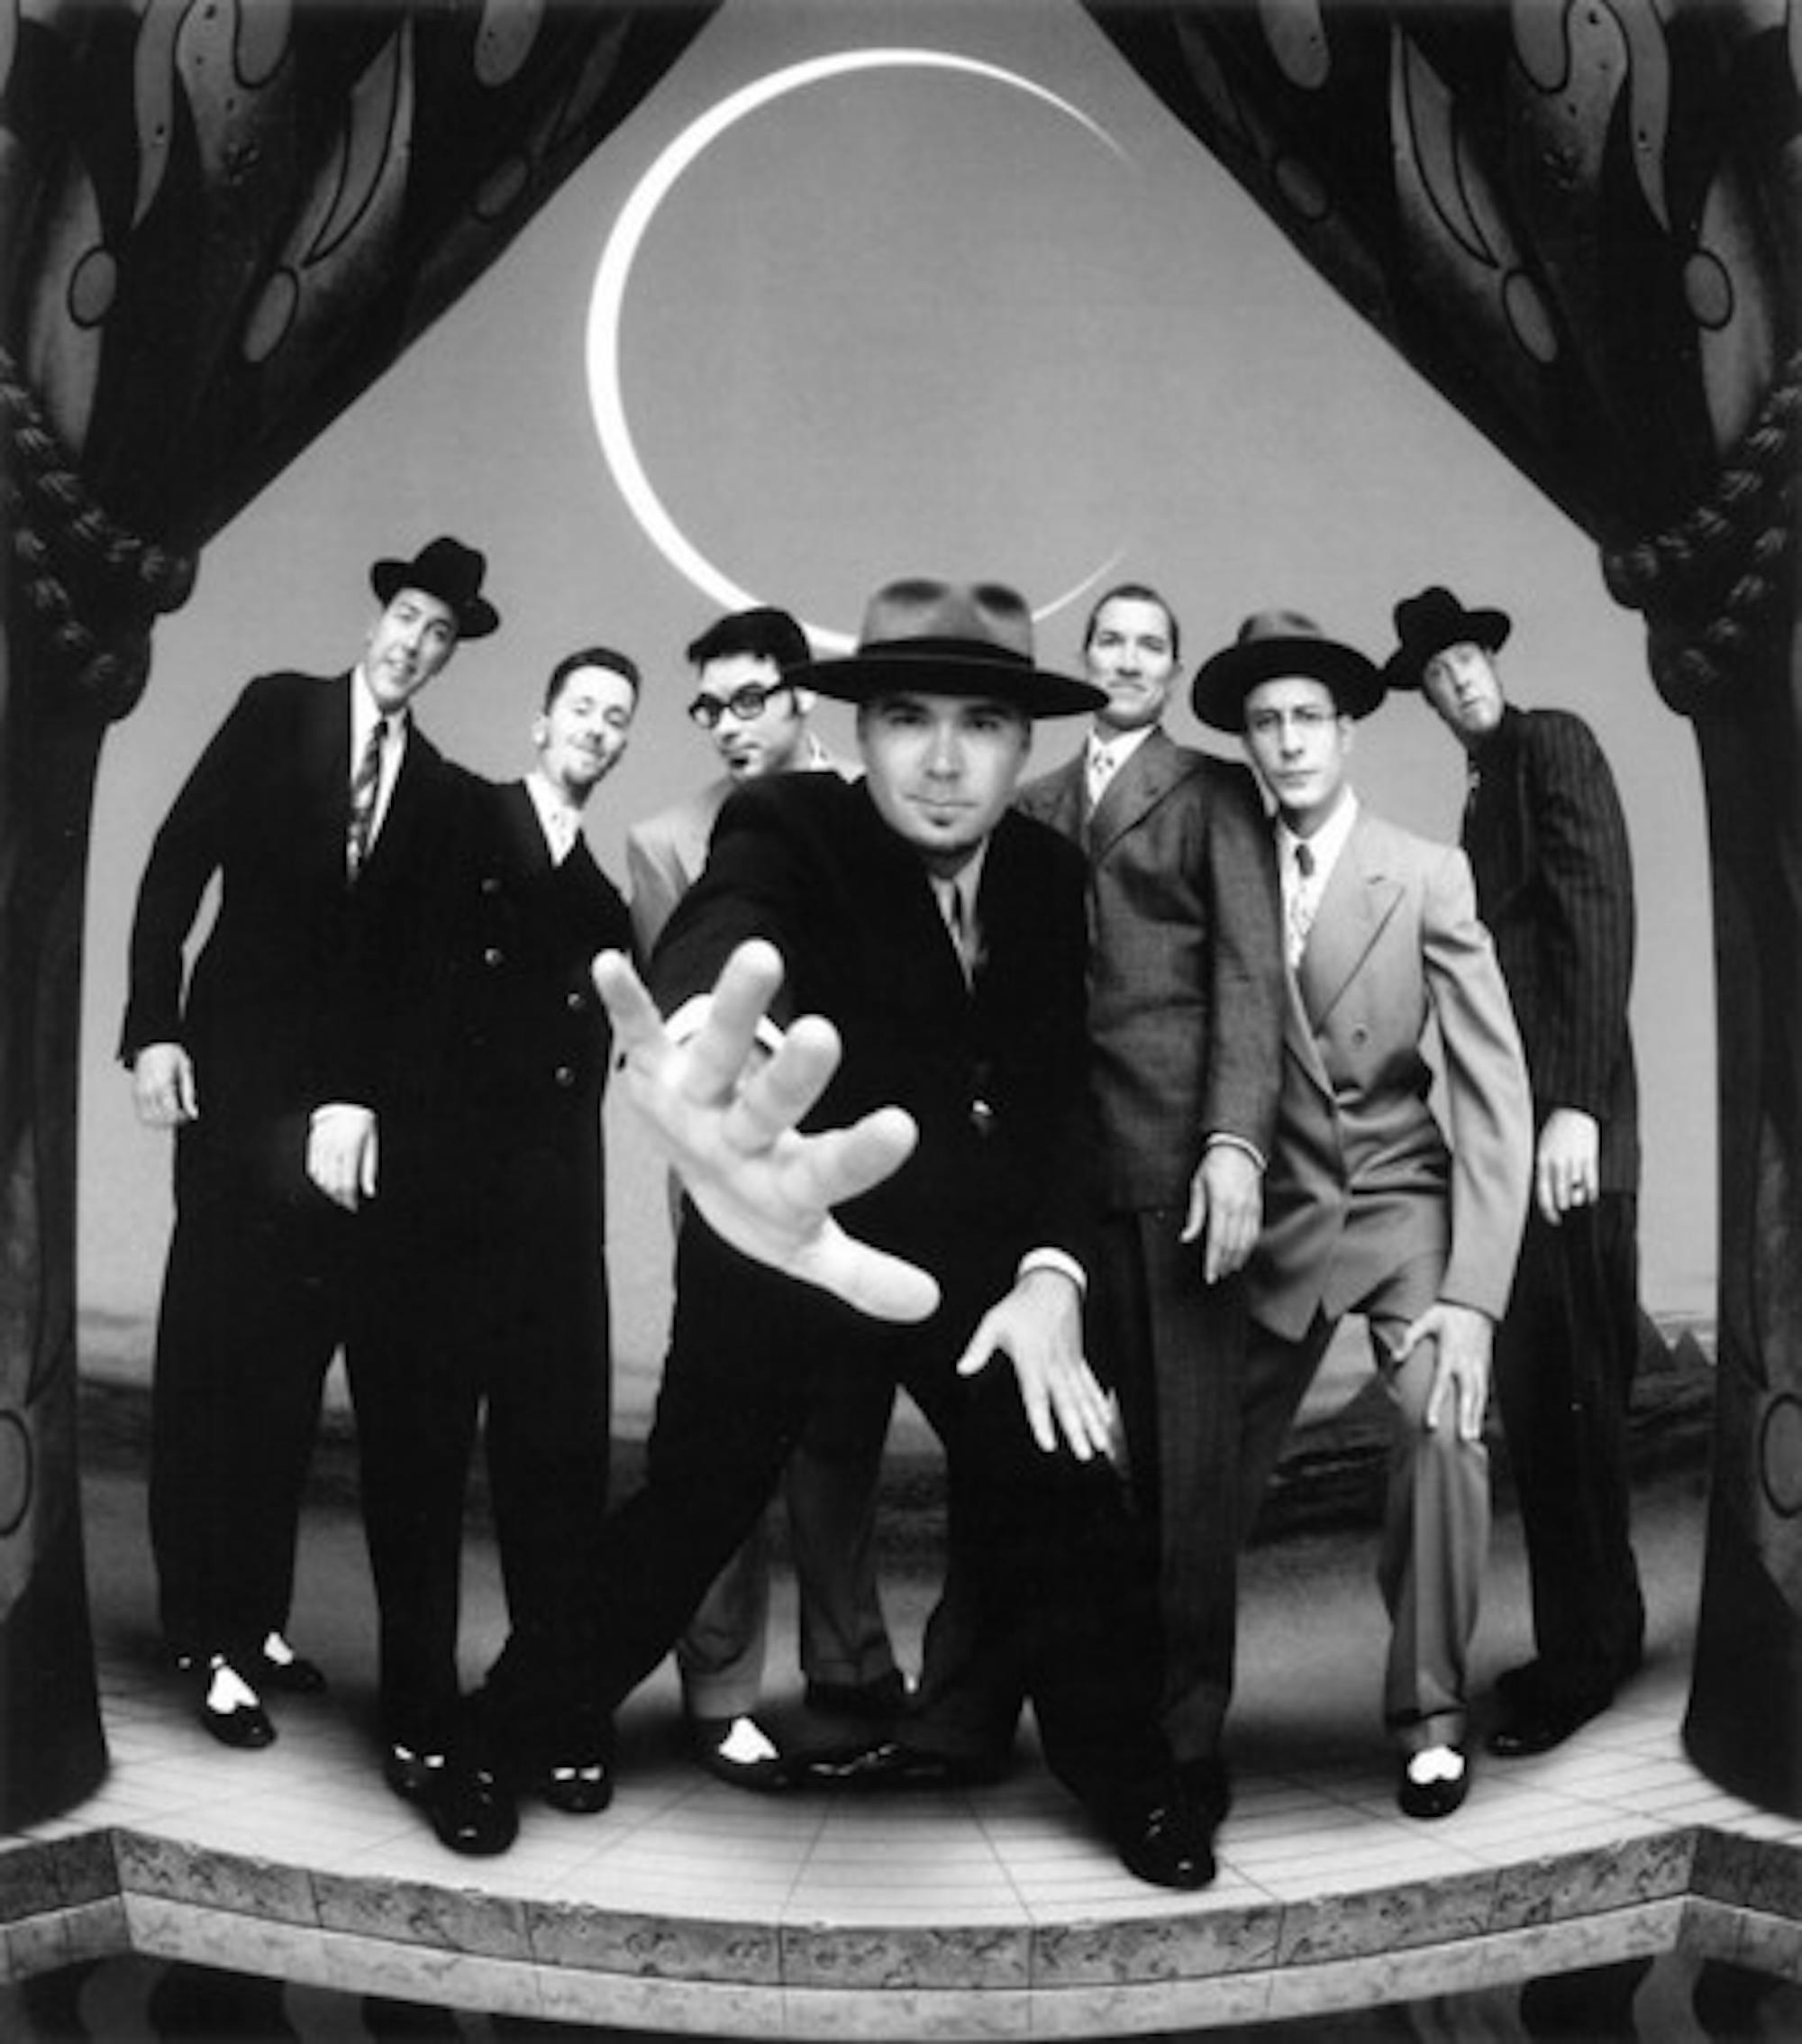 Big Bad Voodoo Daddy tours with the gusto of Big Band era groups.